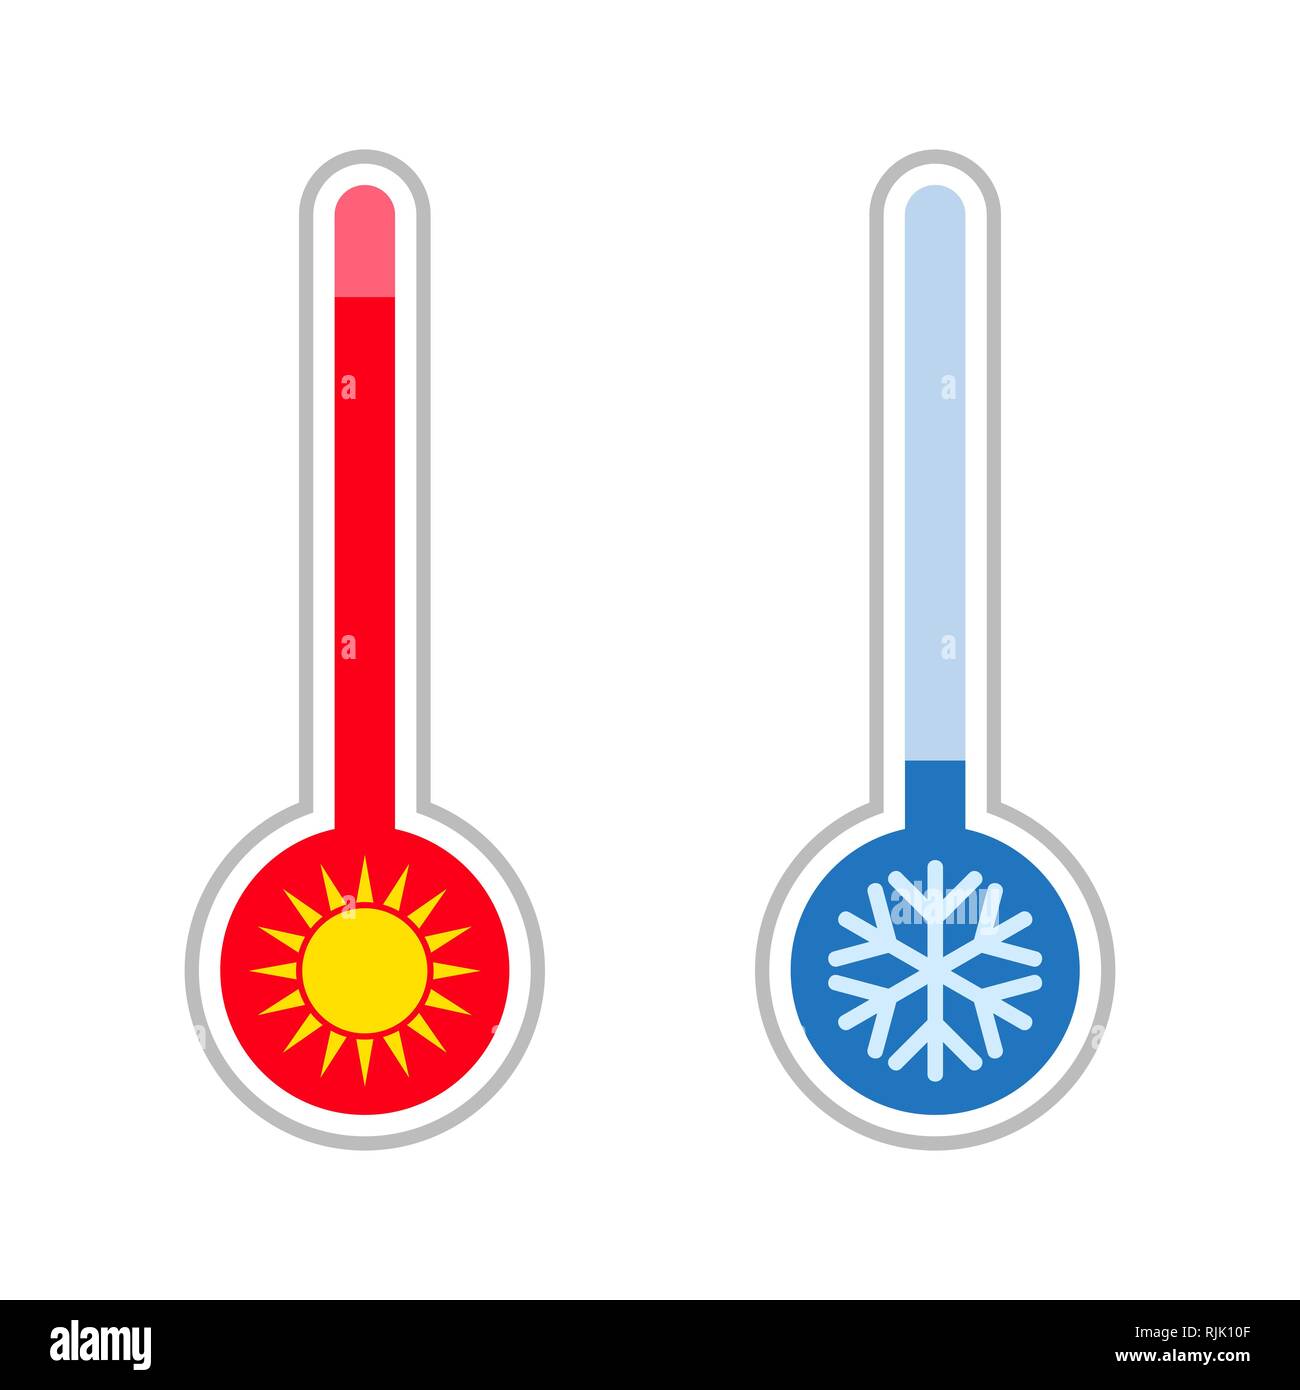 https://c8.alamy.com/comp/RJK10F/meteorology-thermometers-measuring-hot-and-cold-temperature-snowflake-sun-icons-RJK10F.jpg